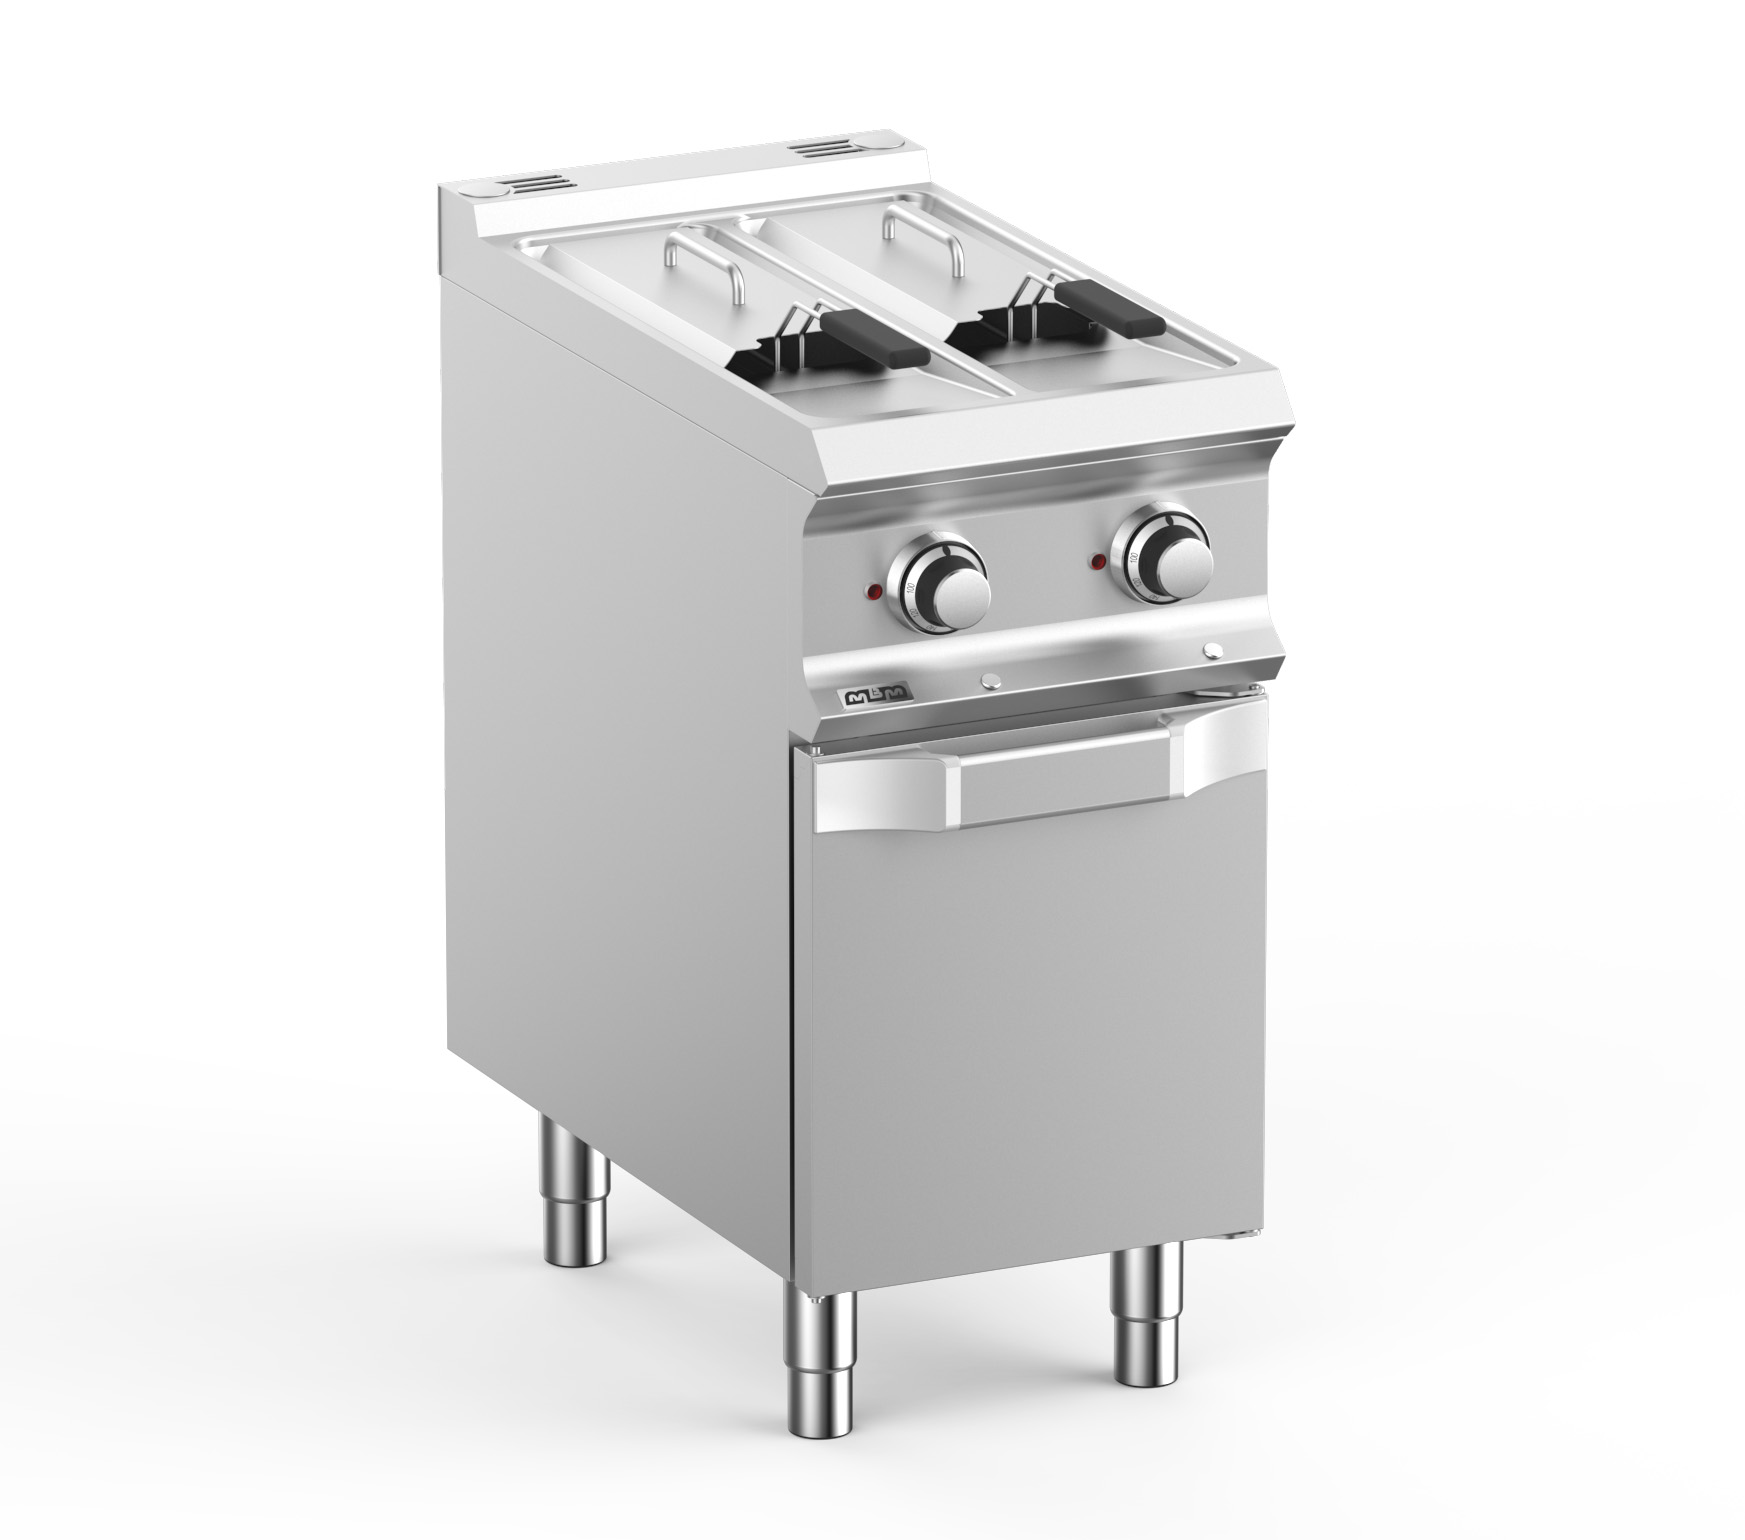 Domina Pro 700 FRE74A2V Twin Tanks Freestanding Electric Fryer